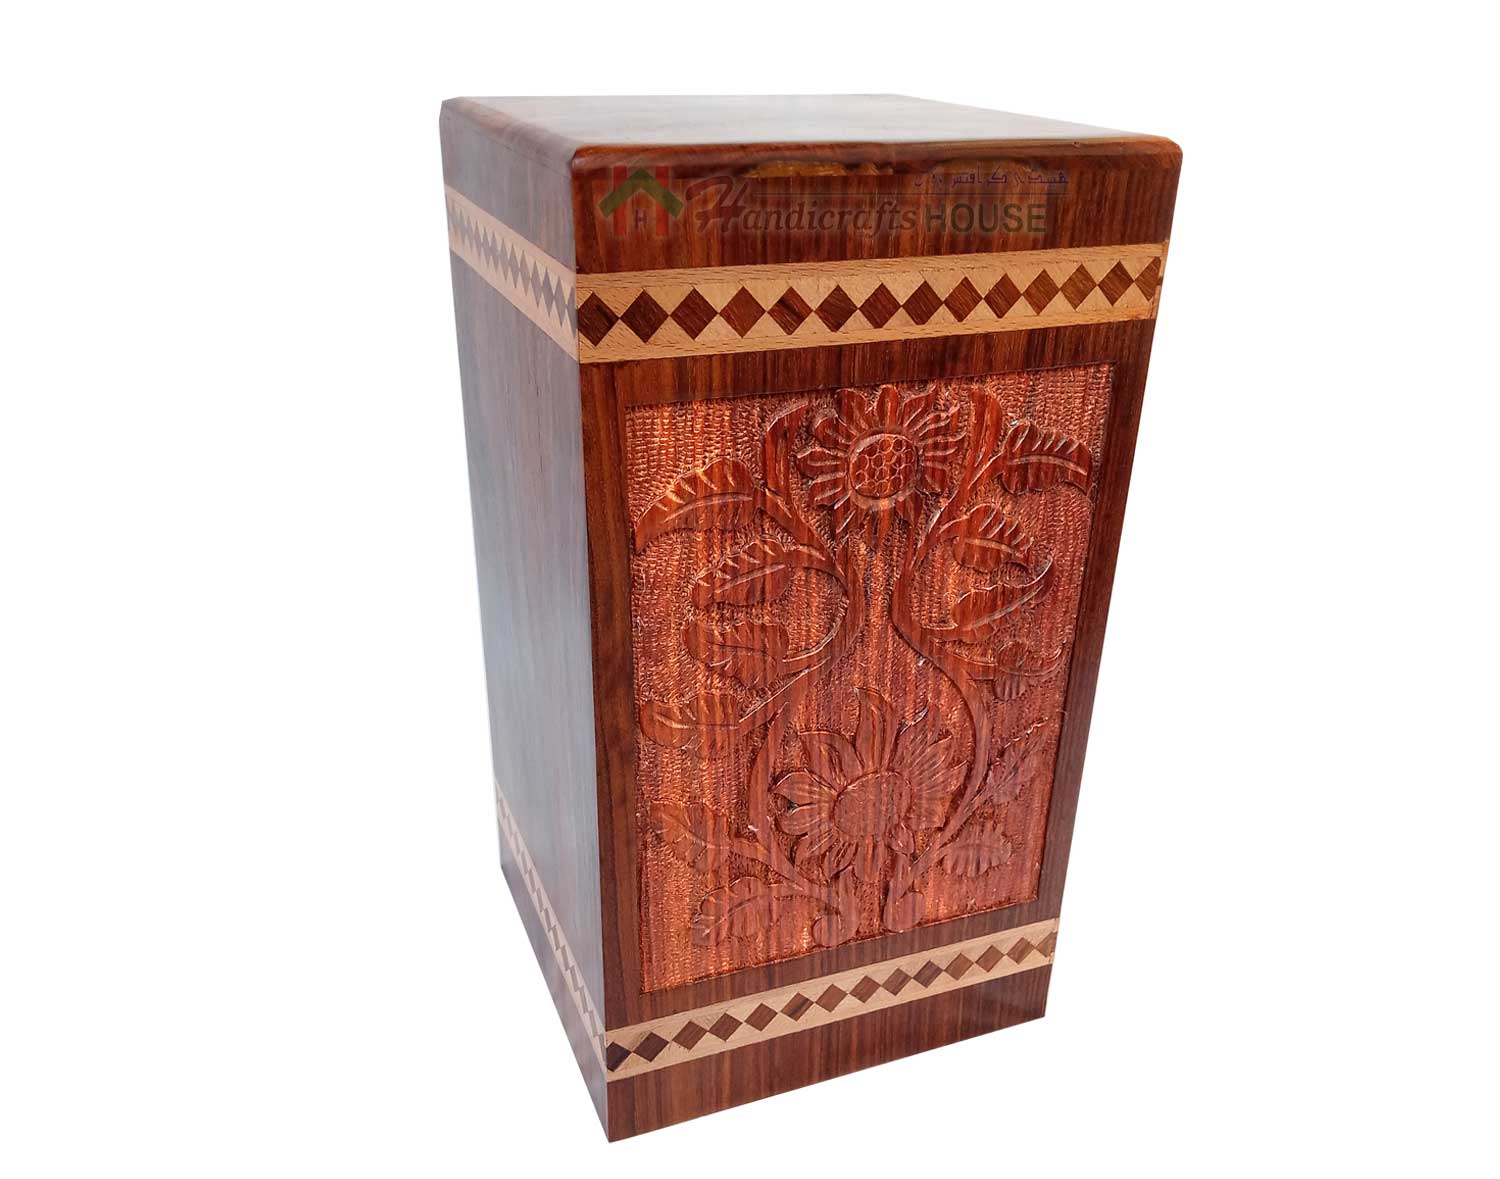 Wooden Urns For Human Ashes, Wood Funeral Urn, Decorative Keepsake Box, Timber Tableware Boxes